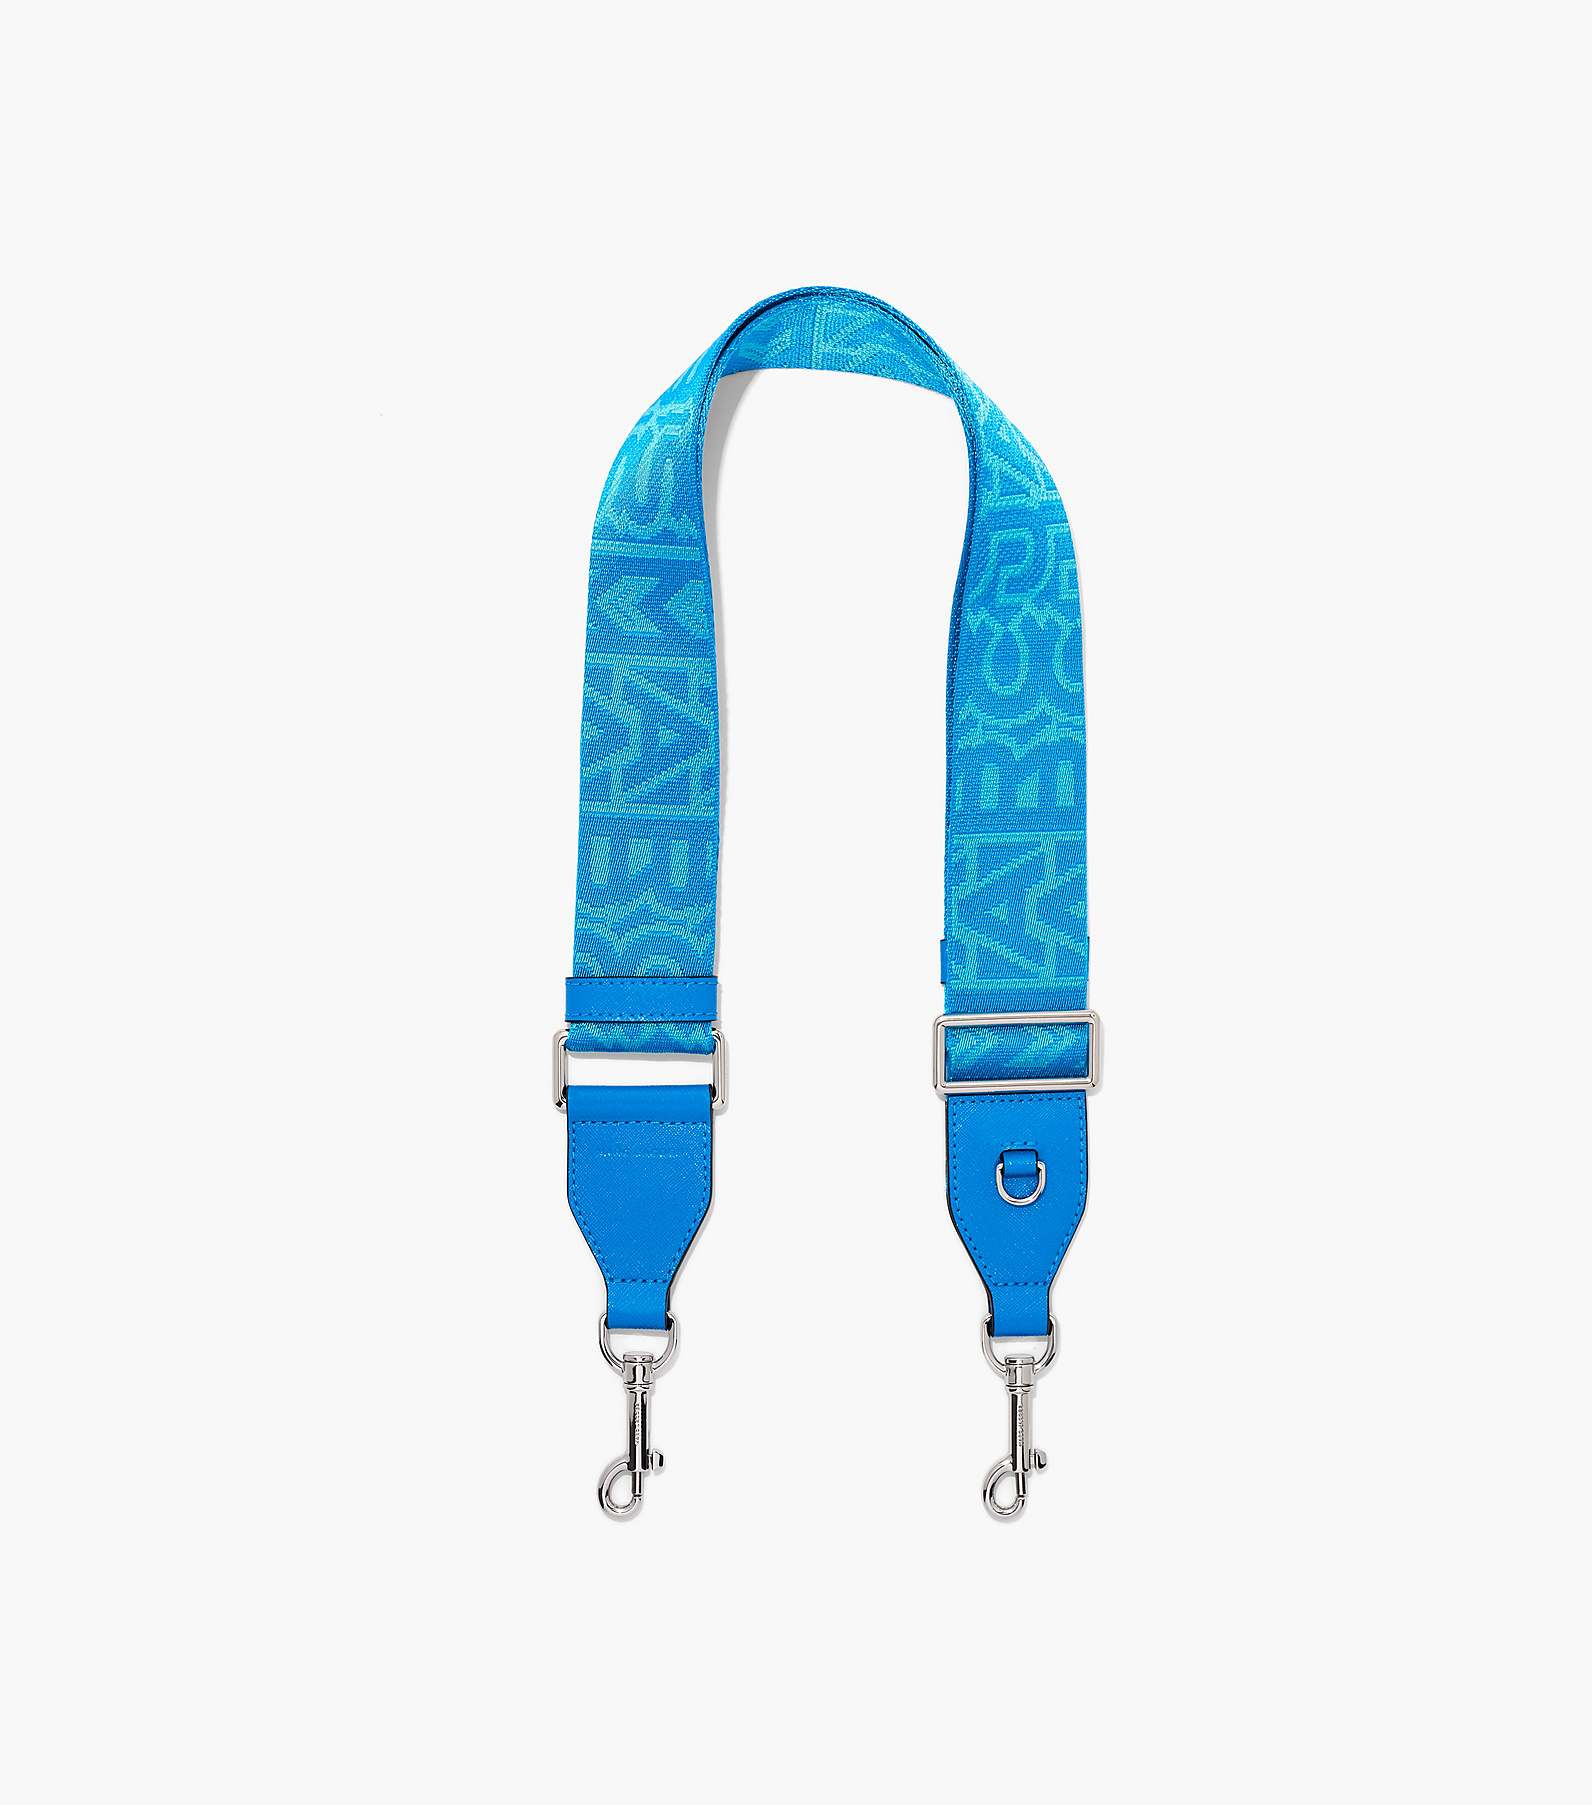 The Monogram Utility Webbing Strap(Straps and Charms)